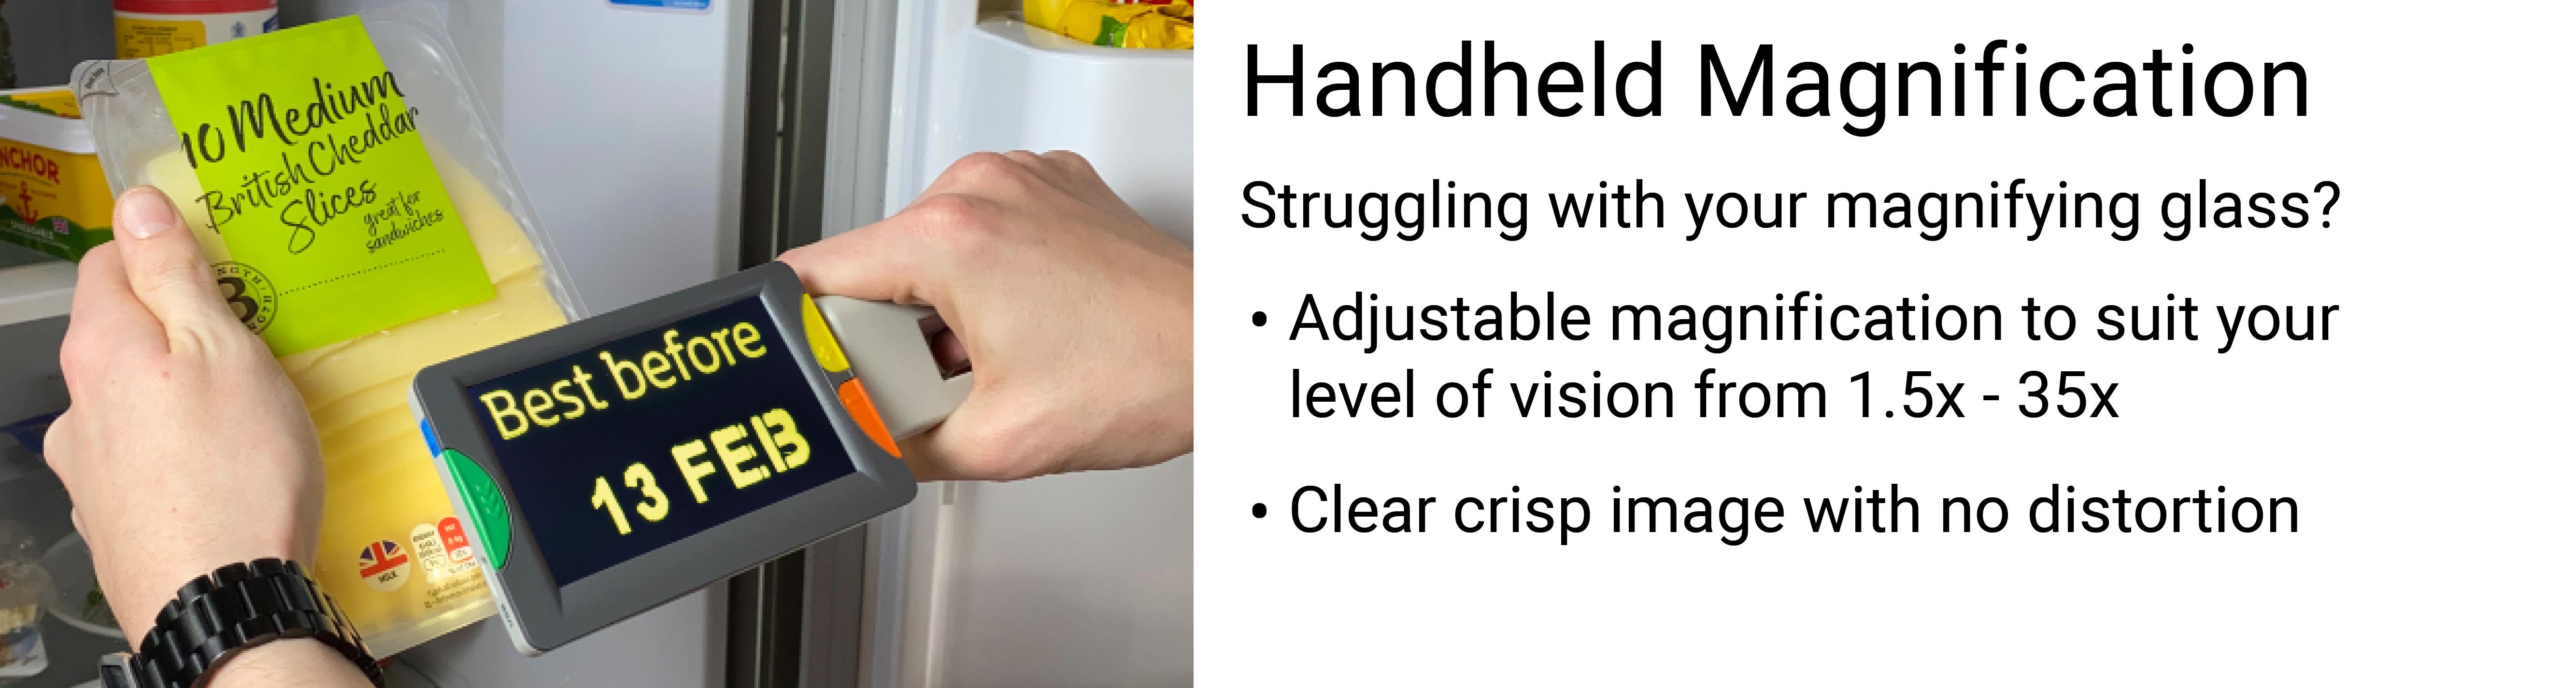 Handheld electronic magnification. Struggling with your magnifying glass? Adjustable magnification to suit your level of vision from 1.5x - 35x. Clear crisp image with no distortion